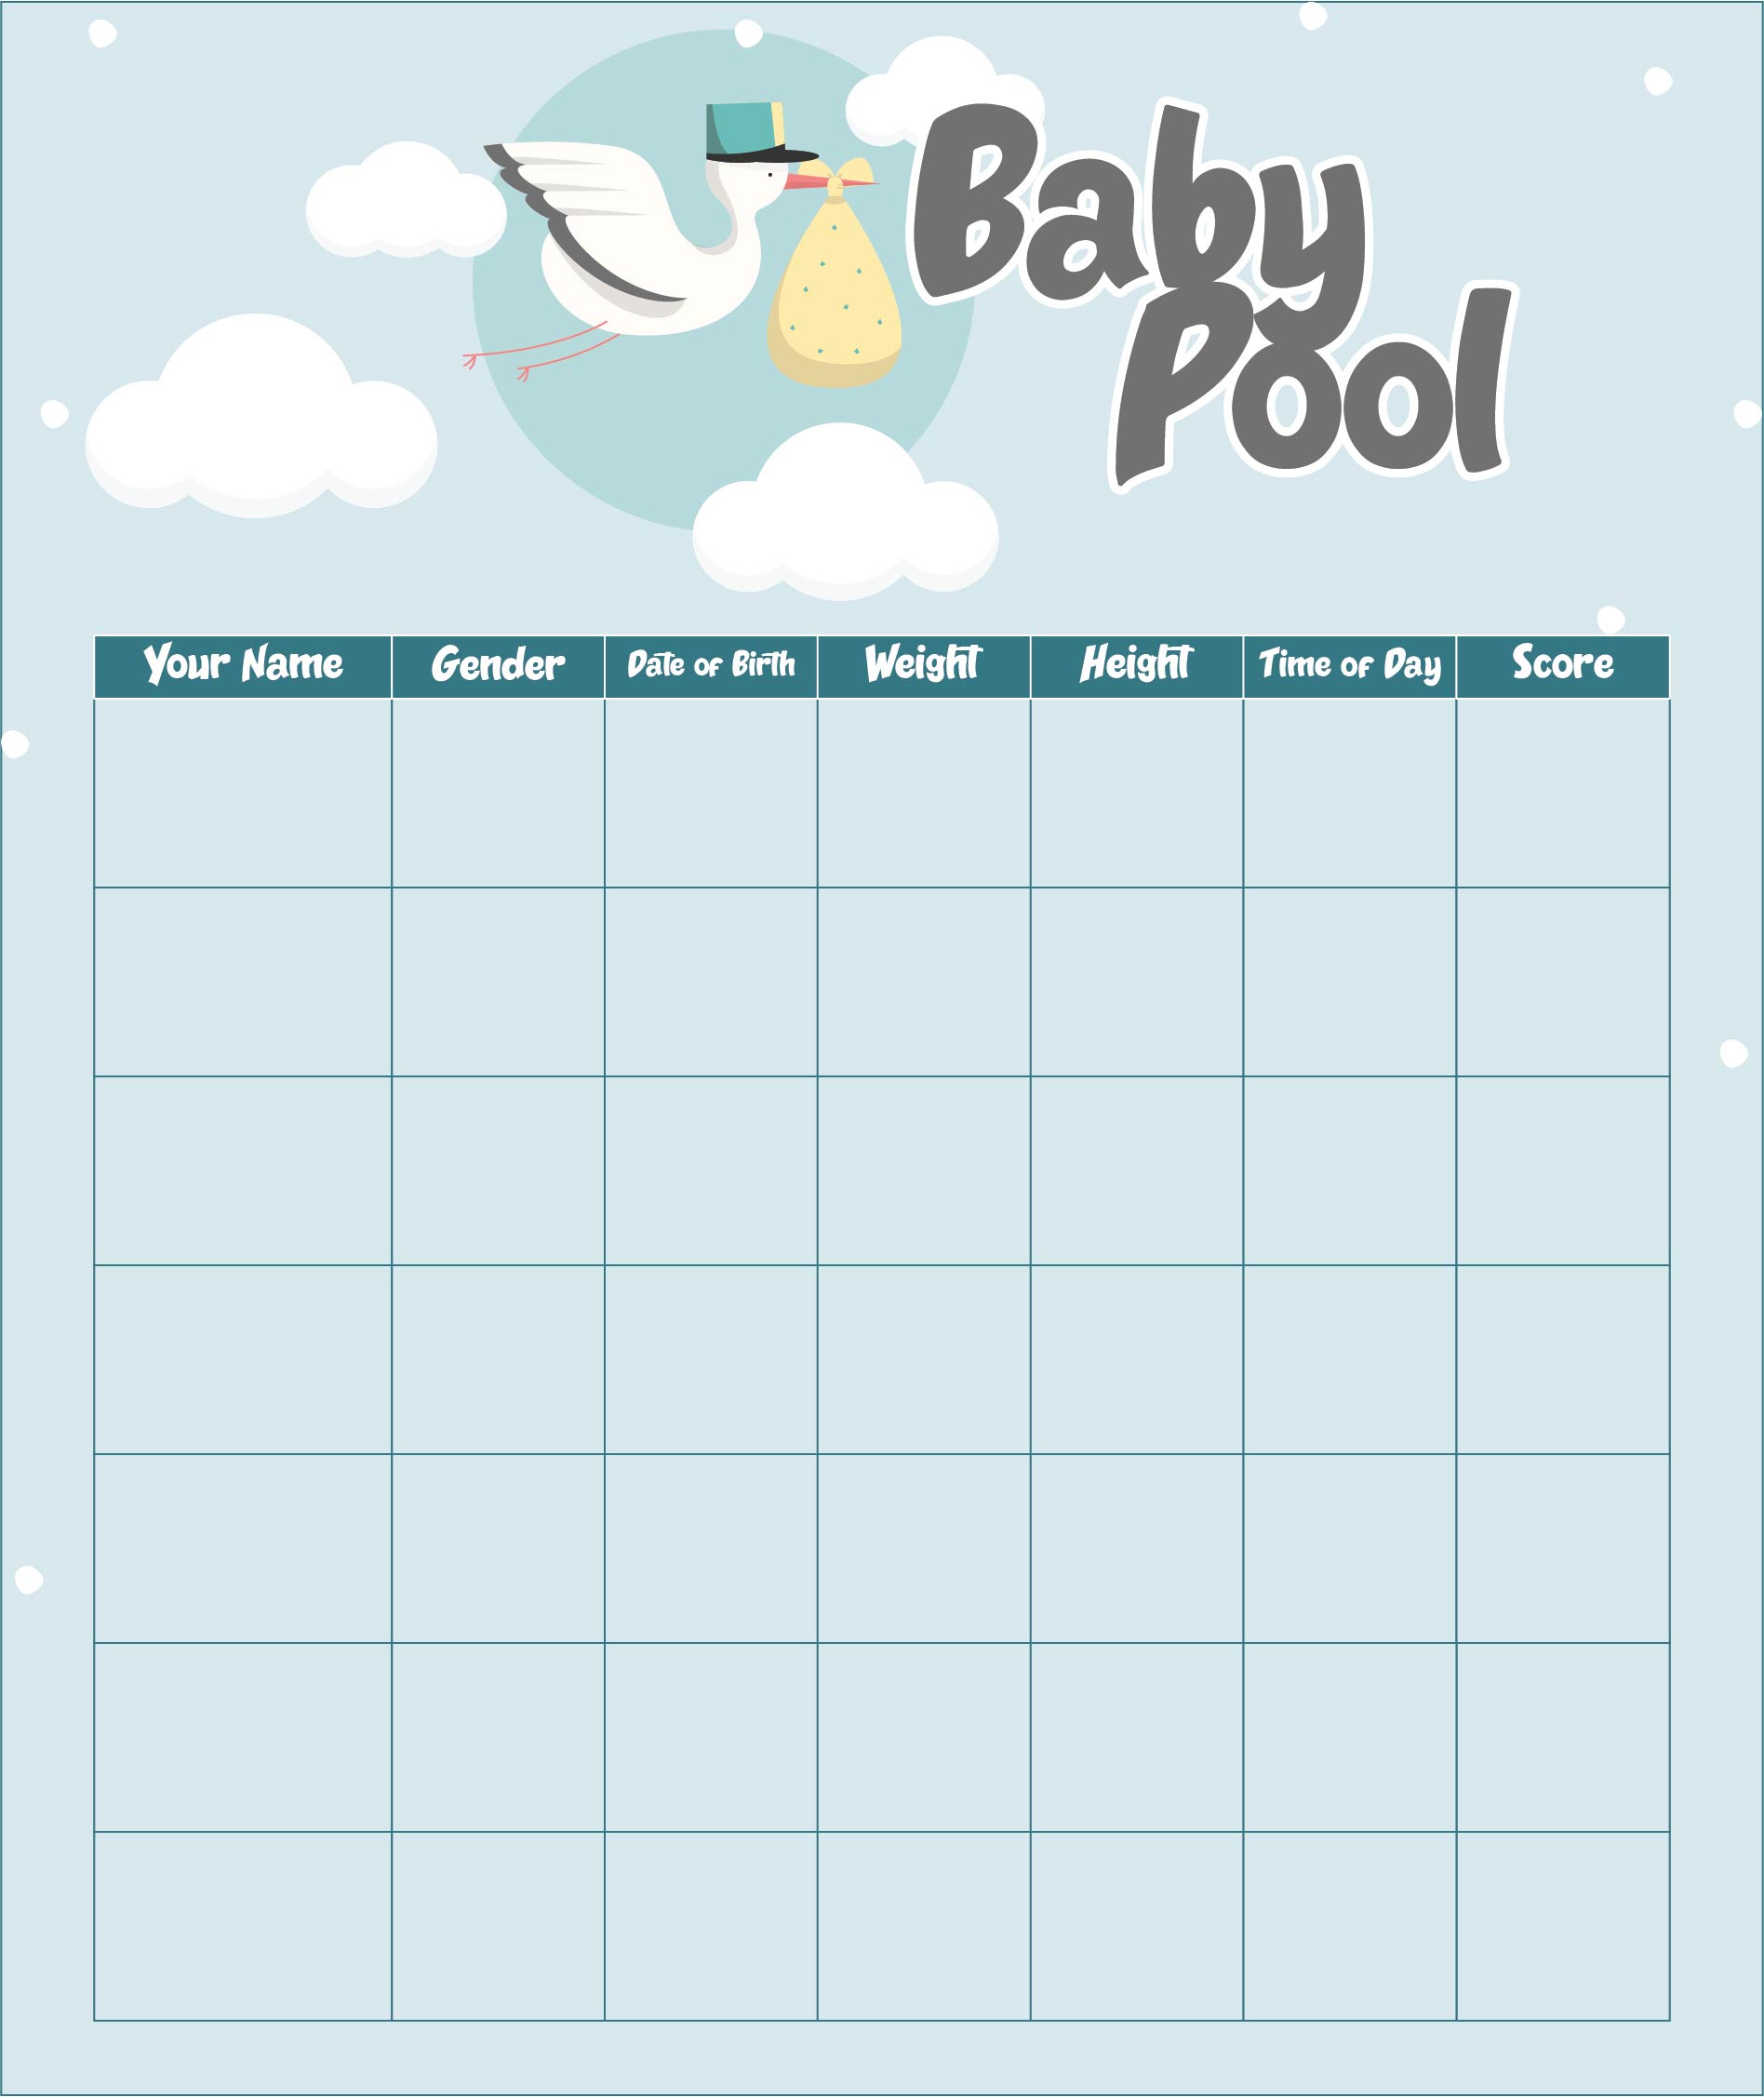 Baby Weight Pool Template